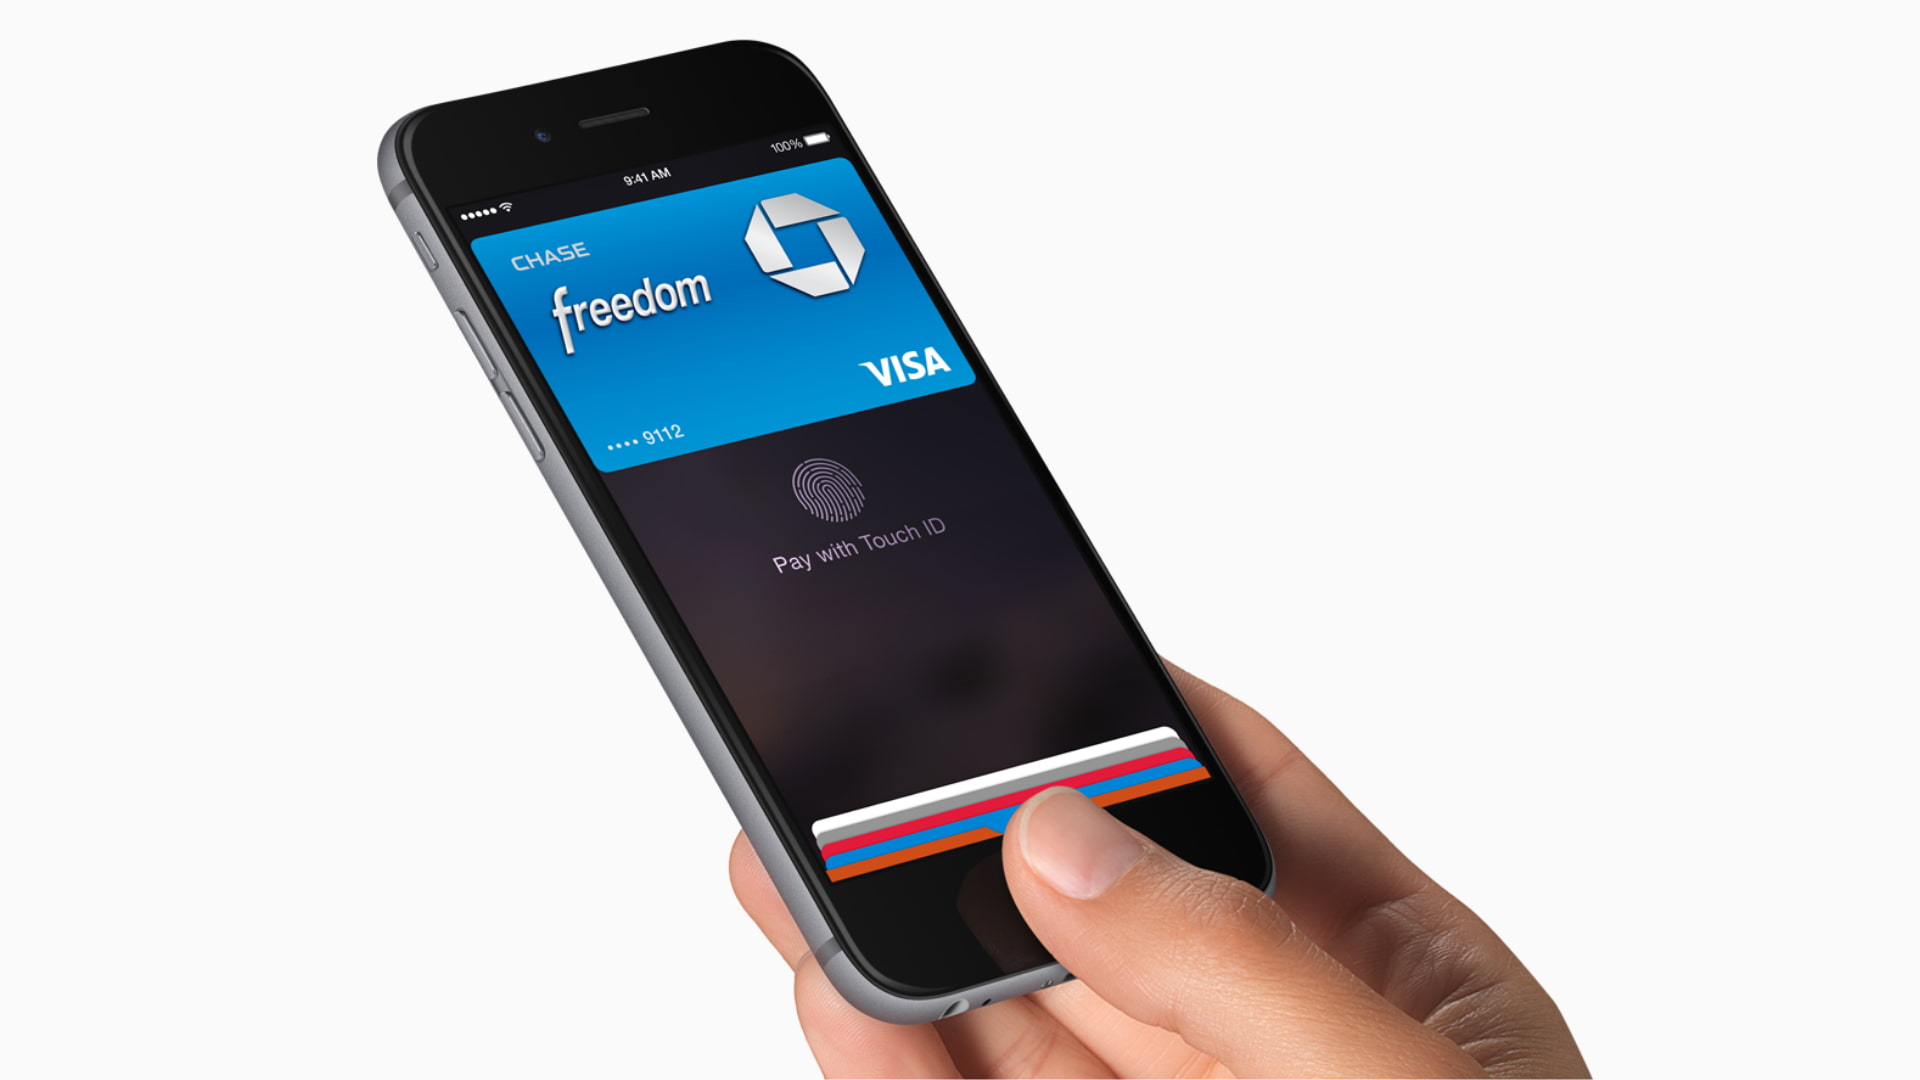 Hand holding an iPhone with Apple Pay screen showing added payment cards